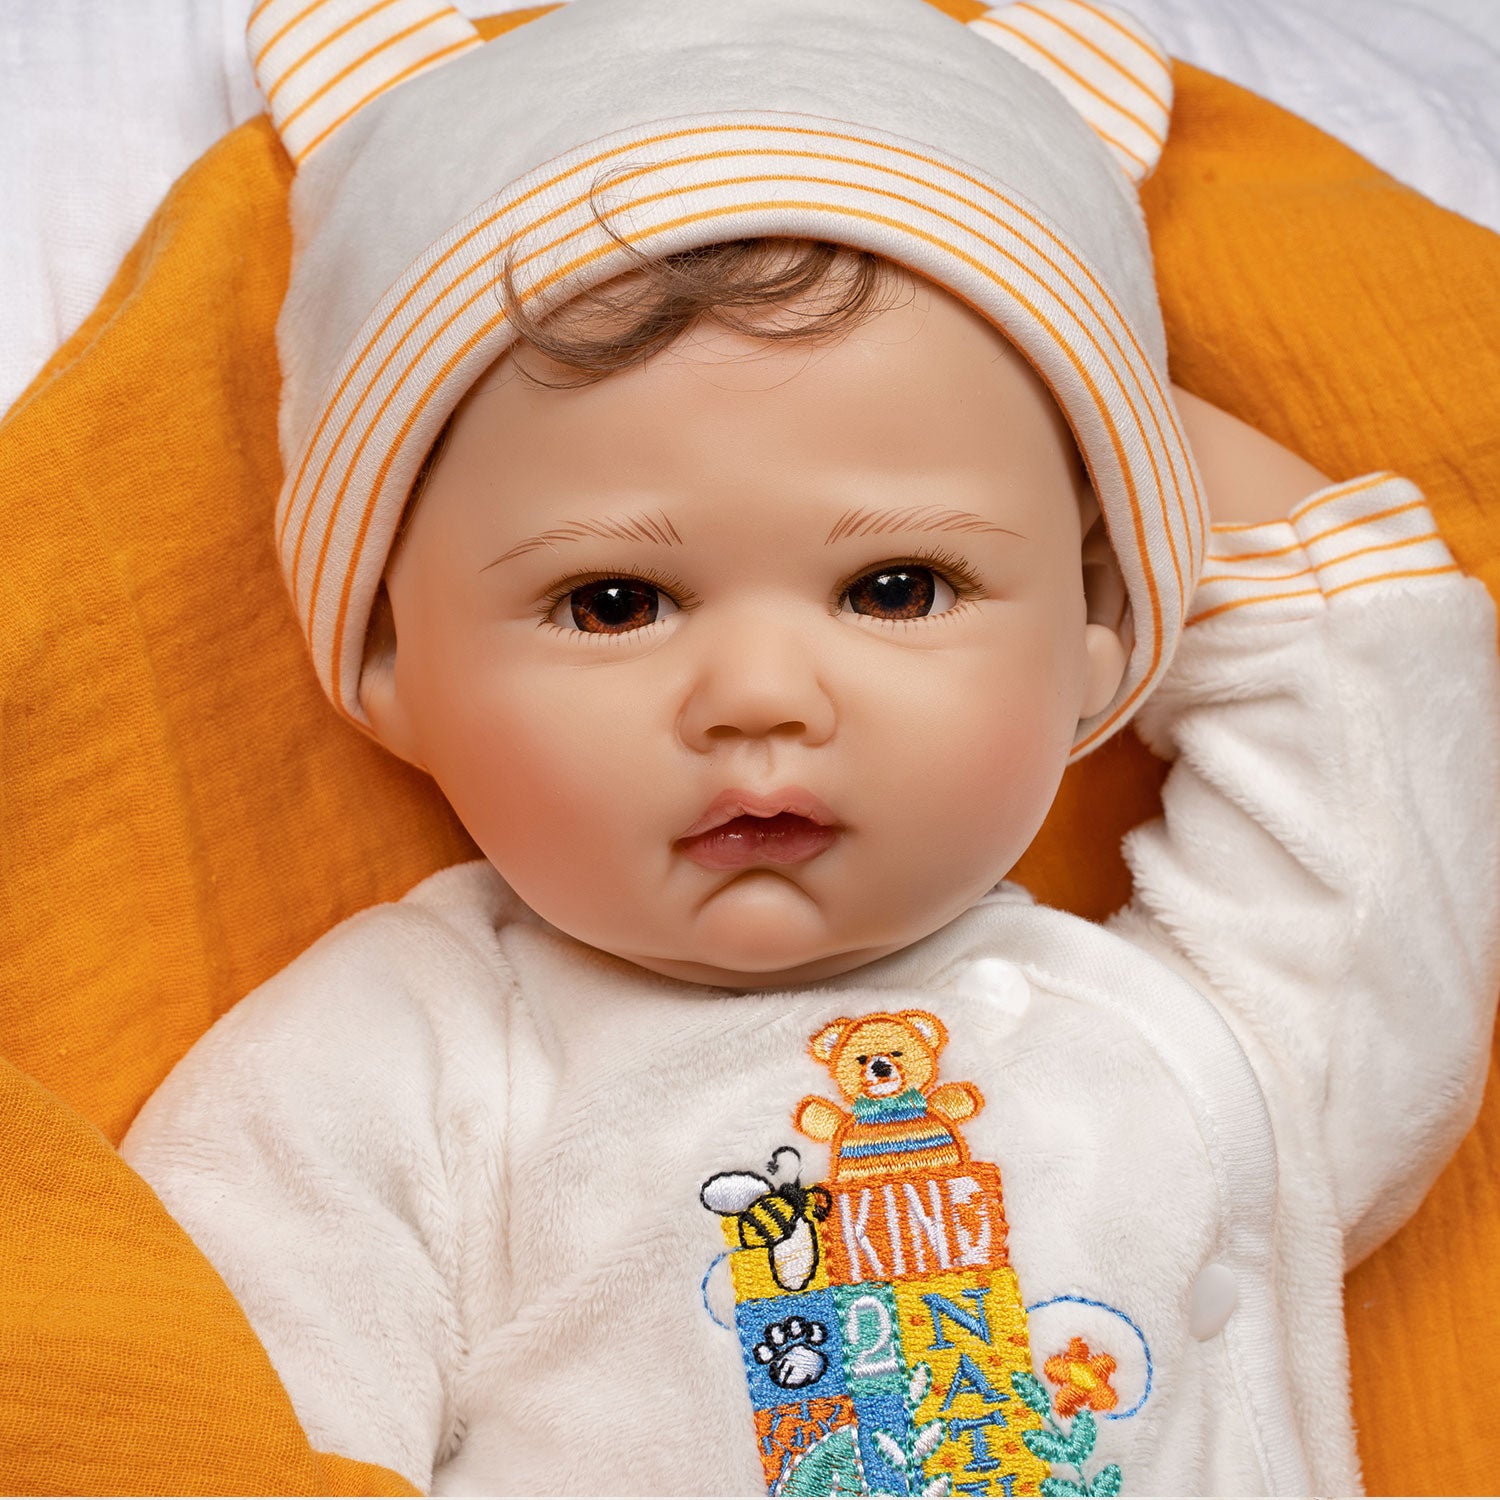 Paradise Galleries Nature Lover 19 Inch Reborn Doll in Exclusive SoftTouch Vinyl with Realistic Feel